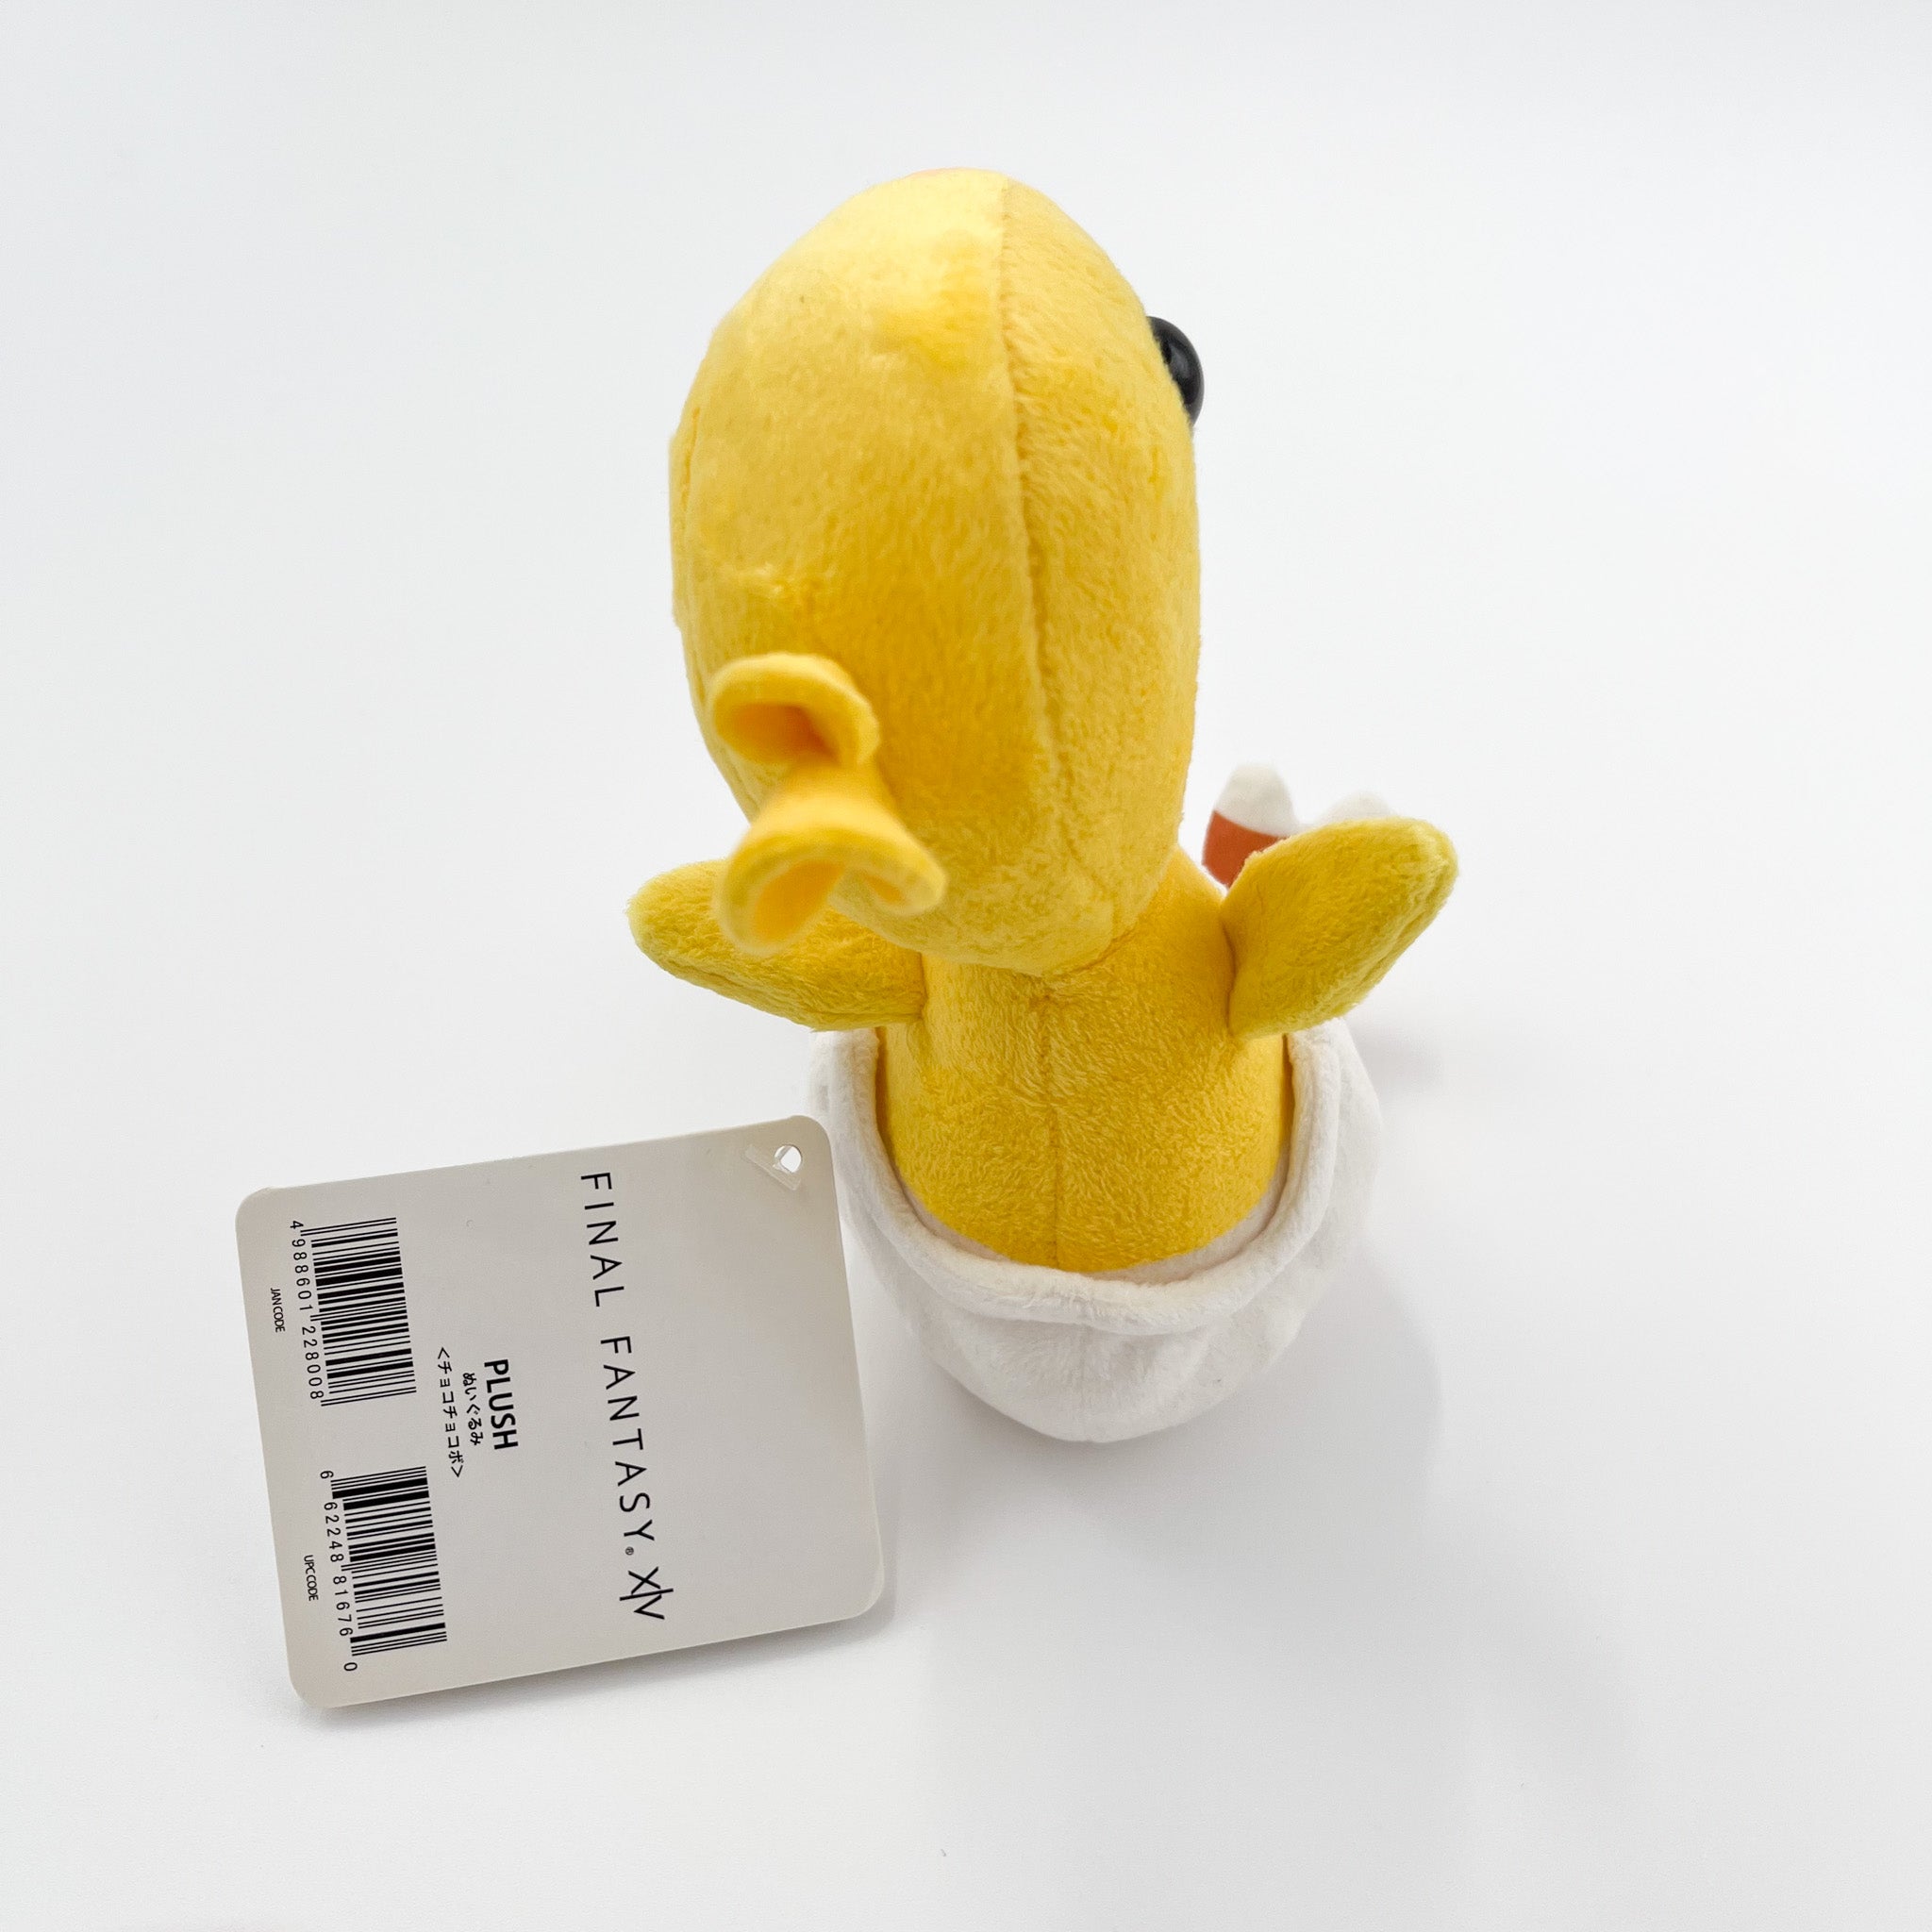 Baby Chocobo Plush from Final Fantasy XIV (used)